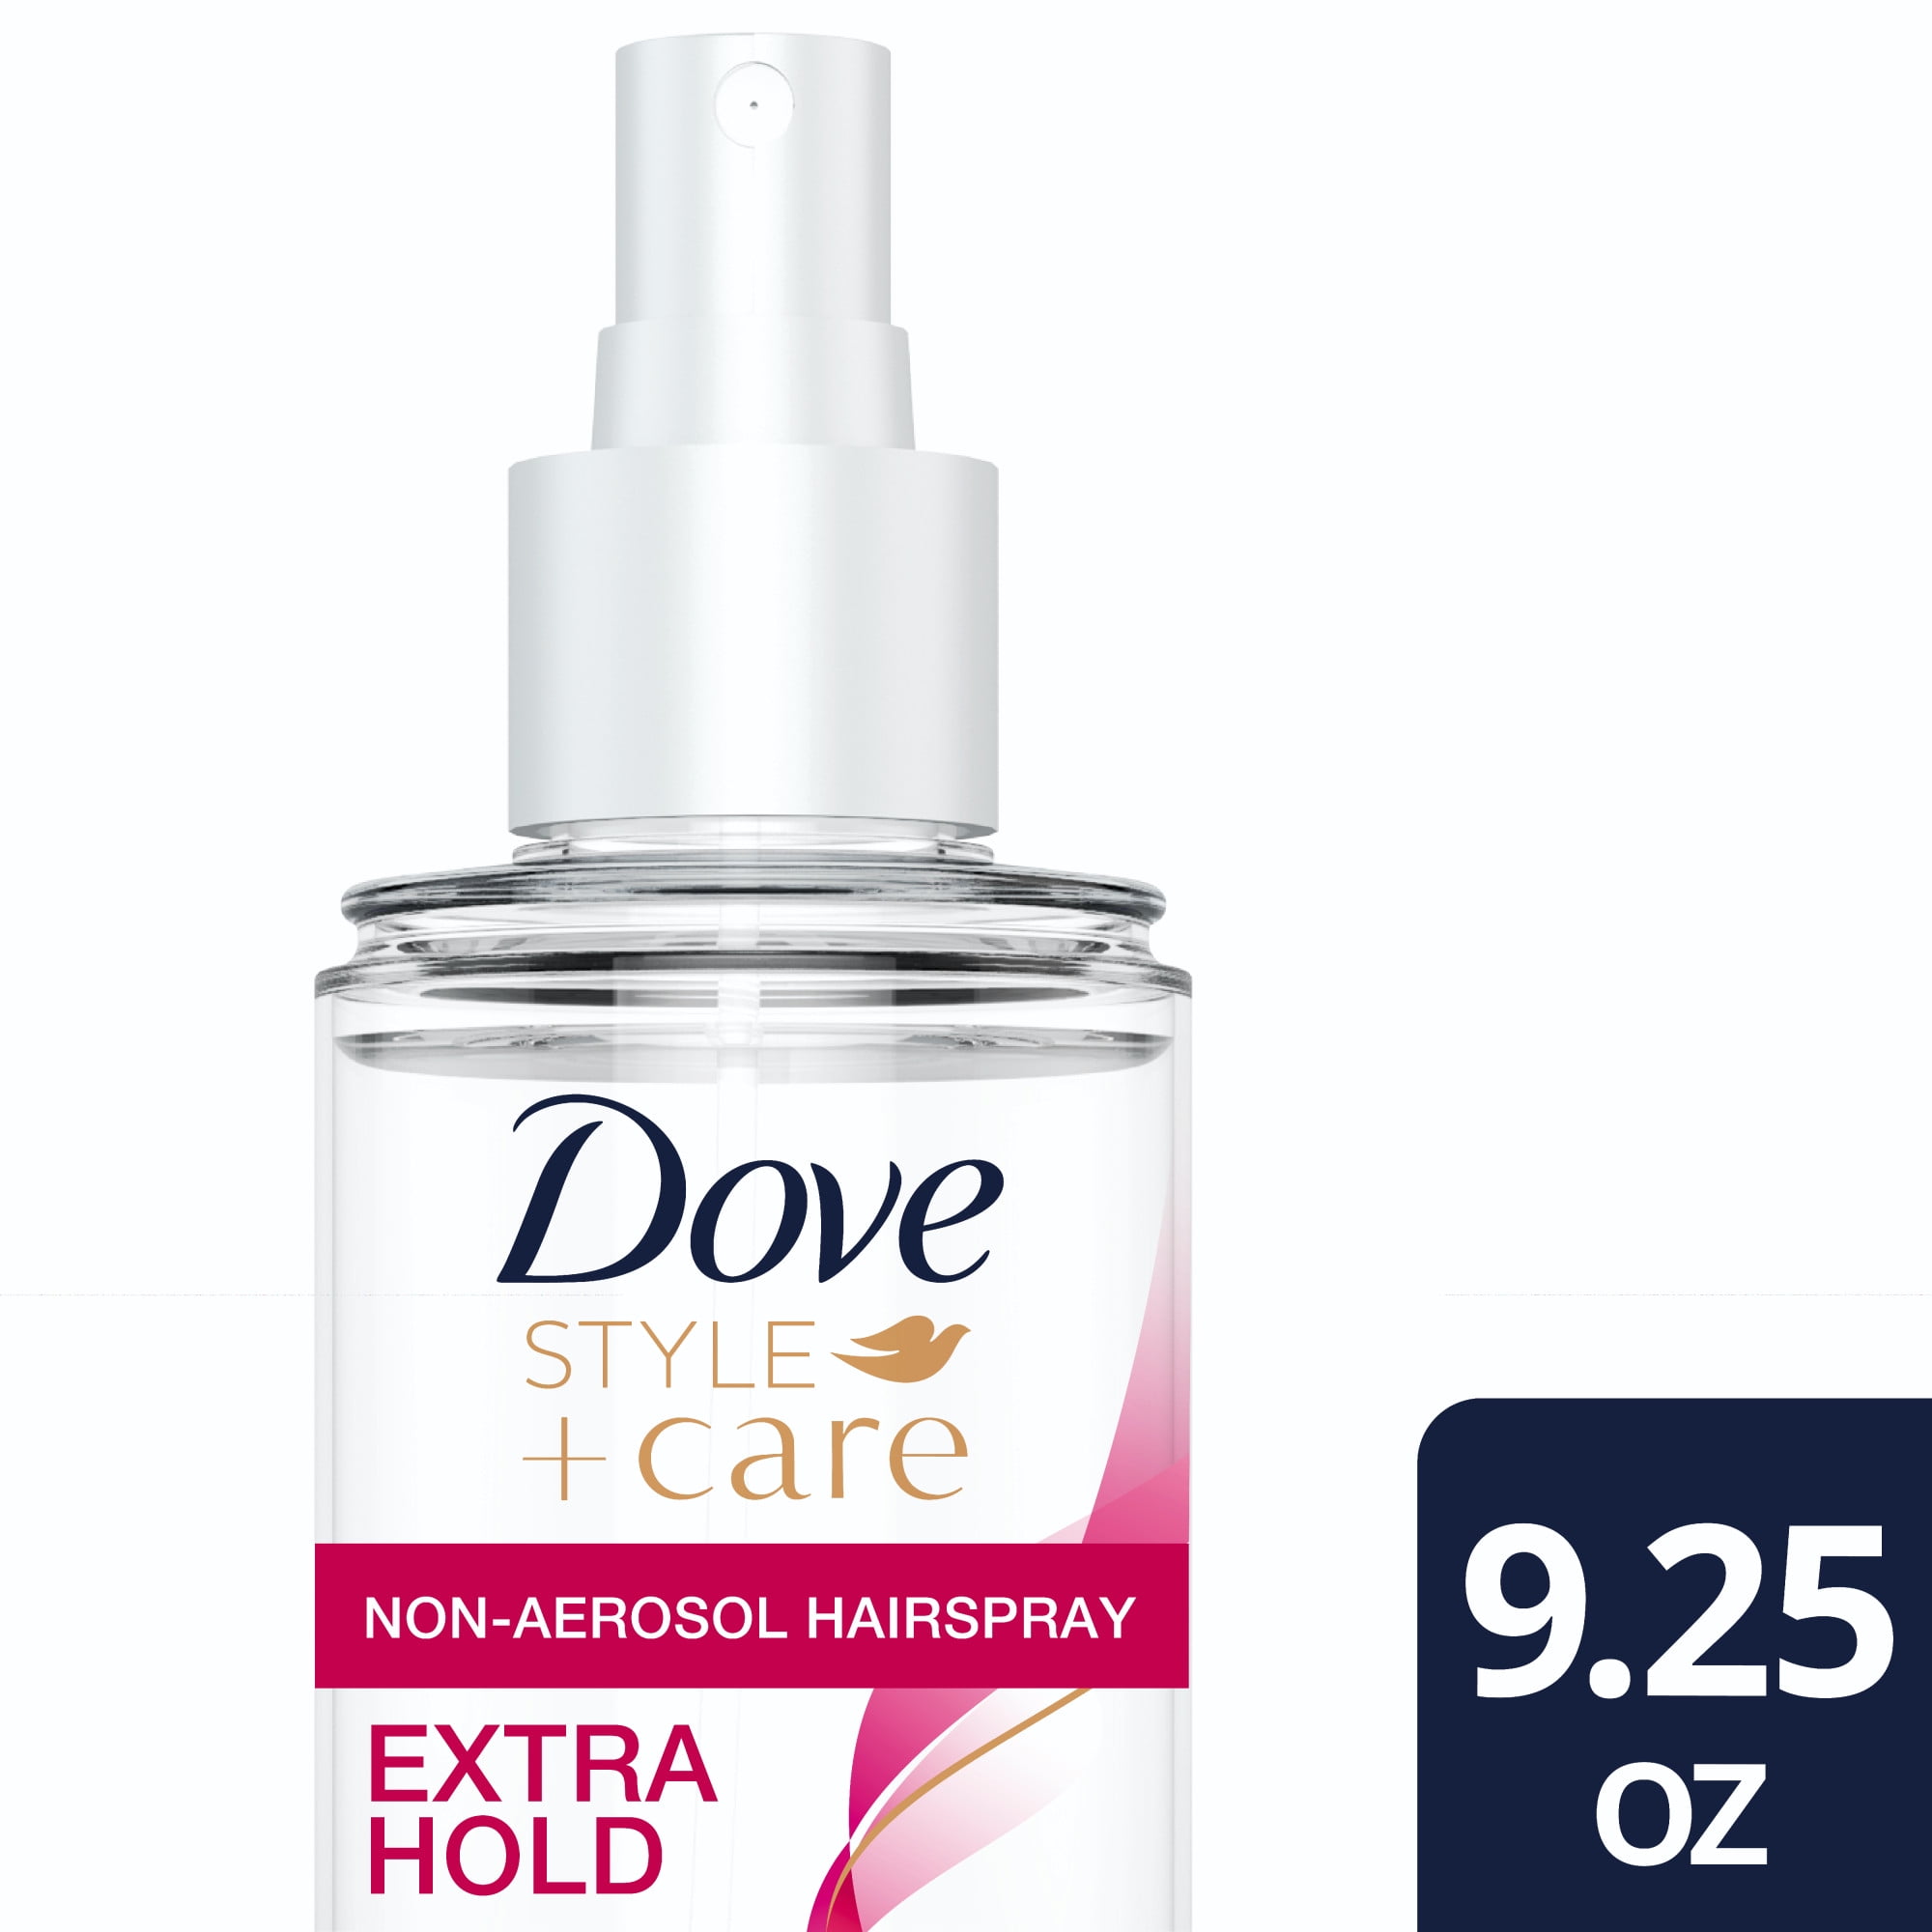 Dove Style+Care Extra Hold Hairspray, 9.25 oz